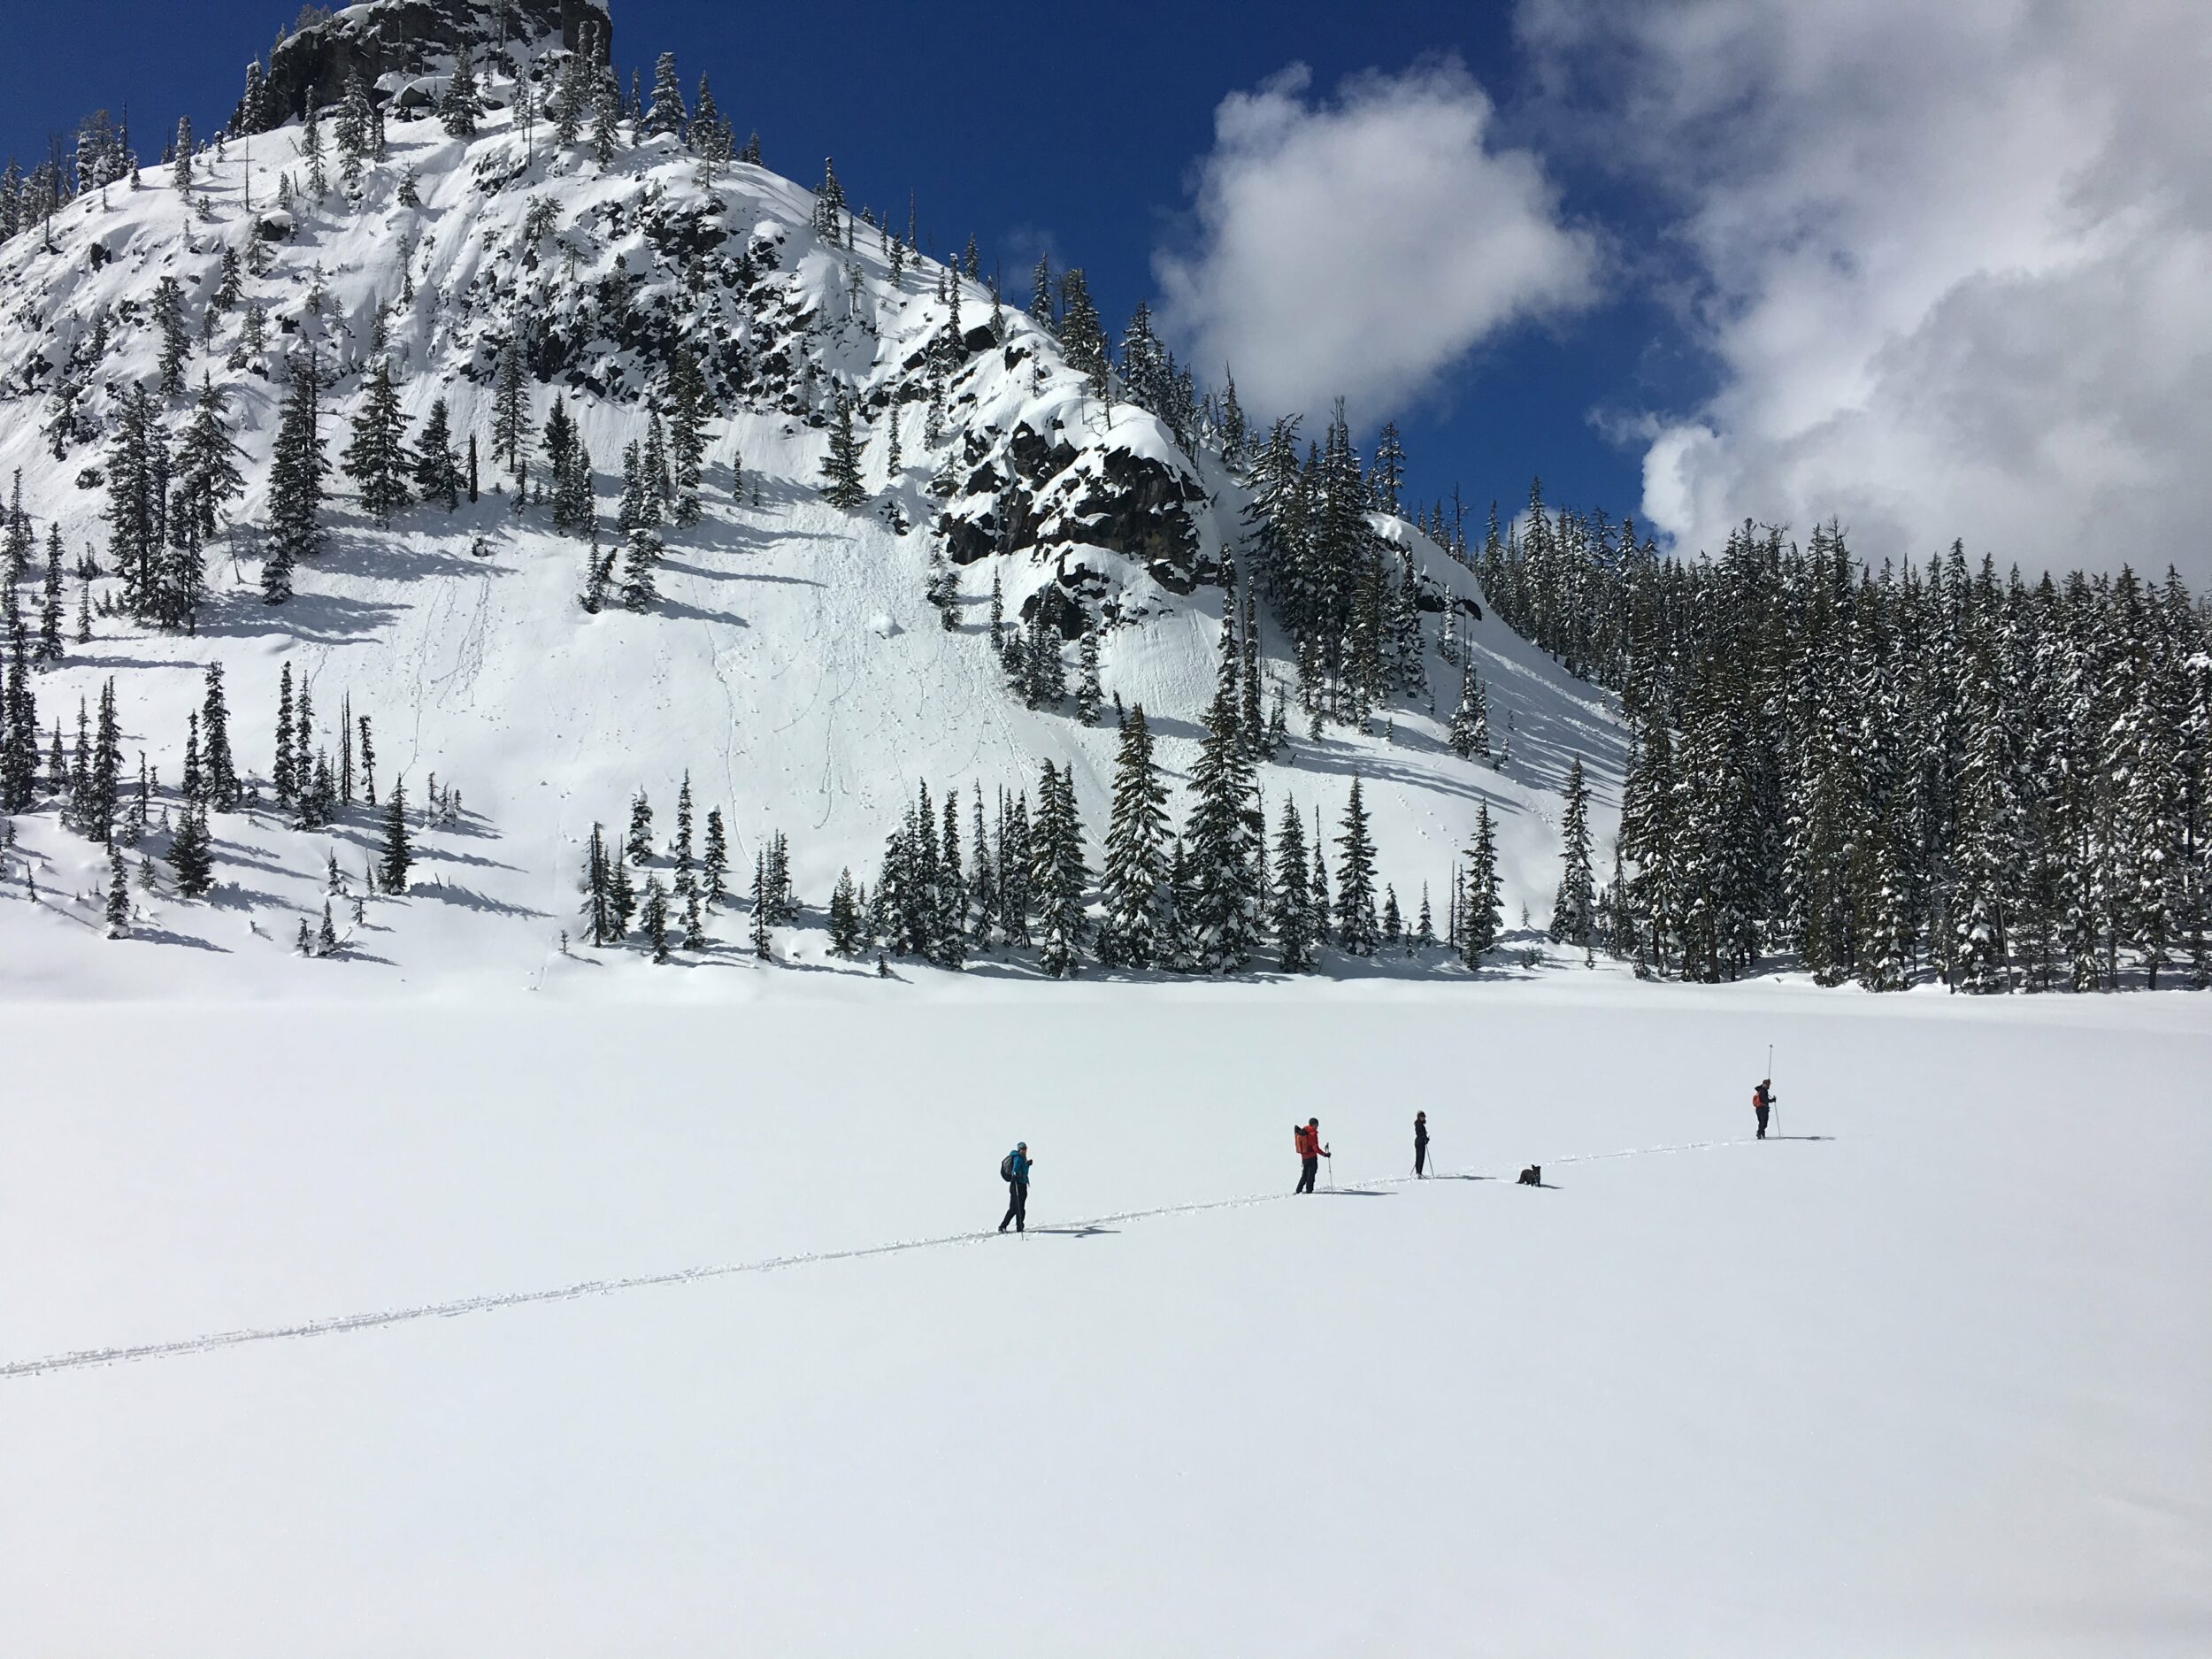 A group of backcountry nordic skiers traverse an open snow field in Oregon